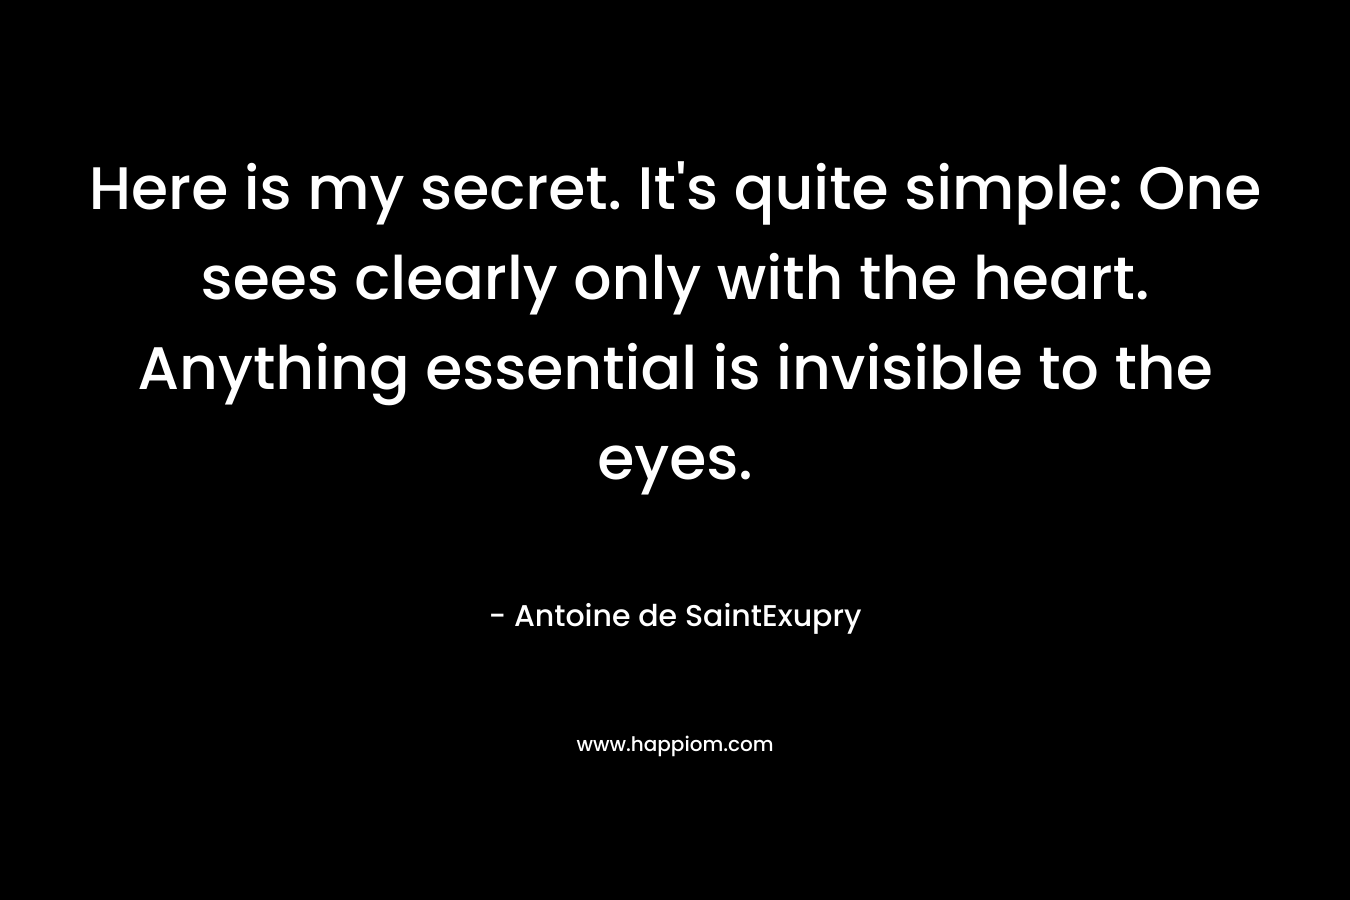 Here is my secret. It's quite simple: One sees clearly only with the heart. Anything essential is invisible to the eyes.